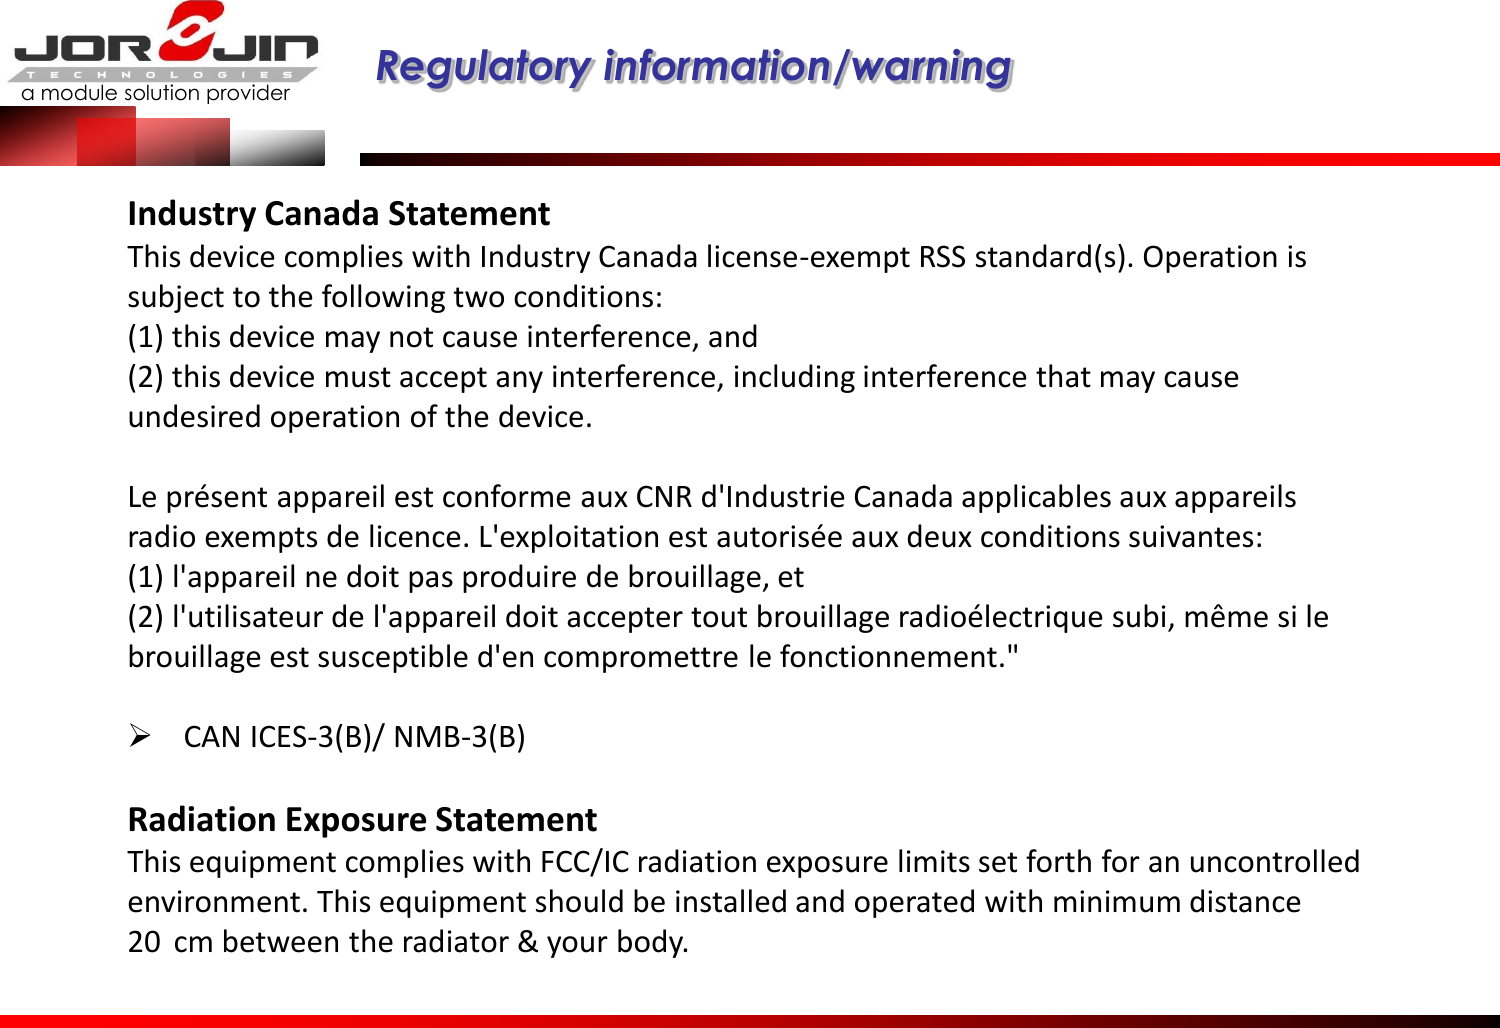 a module solution provider  Regulatory information/warning   Industry Canada Statement This device complies with Industry Canada license-exempt RSS standard(s). Operation is subject to the following two conditions:  (1) this device may not cause interference, and  (2) this device must accept any interference, including interference that may cause undesired operation of the device.   Le présent appareil est conforme aux CNR d&apos;Industrie Canada applicables aux appareils radio exempts de licence. L&apos;exploitation est autorisée aux deux conditions suivantes:  (1) l&apos;appareil ne doit pas produire de brouillage, et  (2) l&apos;utilisateur de l&apos;appareil doit accepter tout brouillage radioélectrique subi, même si le brouillage est susceptible d&apos;en compromettre le fonctionnement.&quot;   CAN ICES-3(B)/ NMB-3(B)  Radiation Exposure Statement This equipment complies with FCC/IC radiation exposure limits set forth for an uncontrolled environment. This equipment should be installed and operated with minimum distance 20  cm between the radiator &amp; your body. 